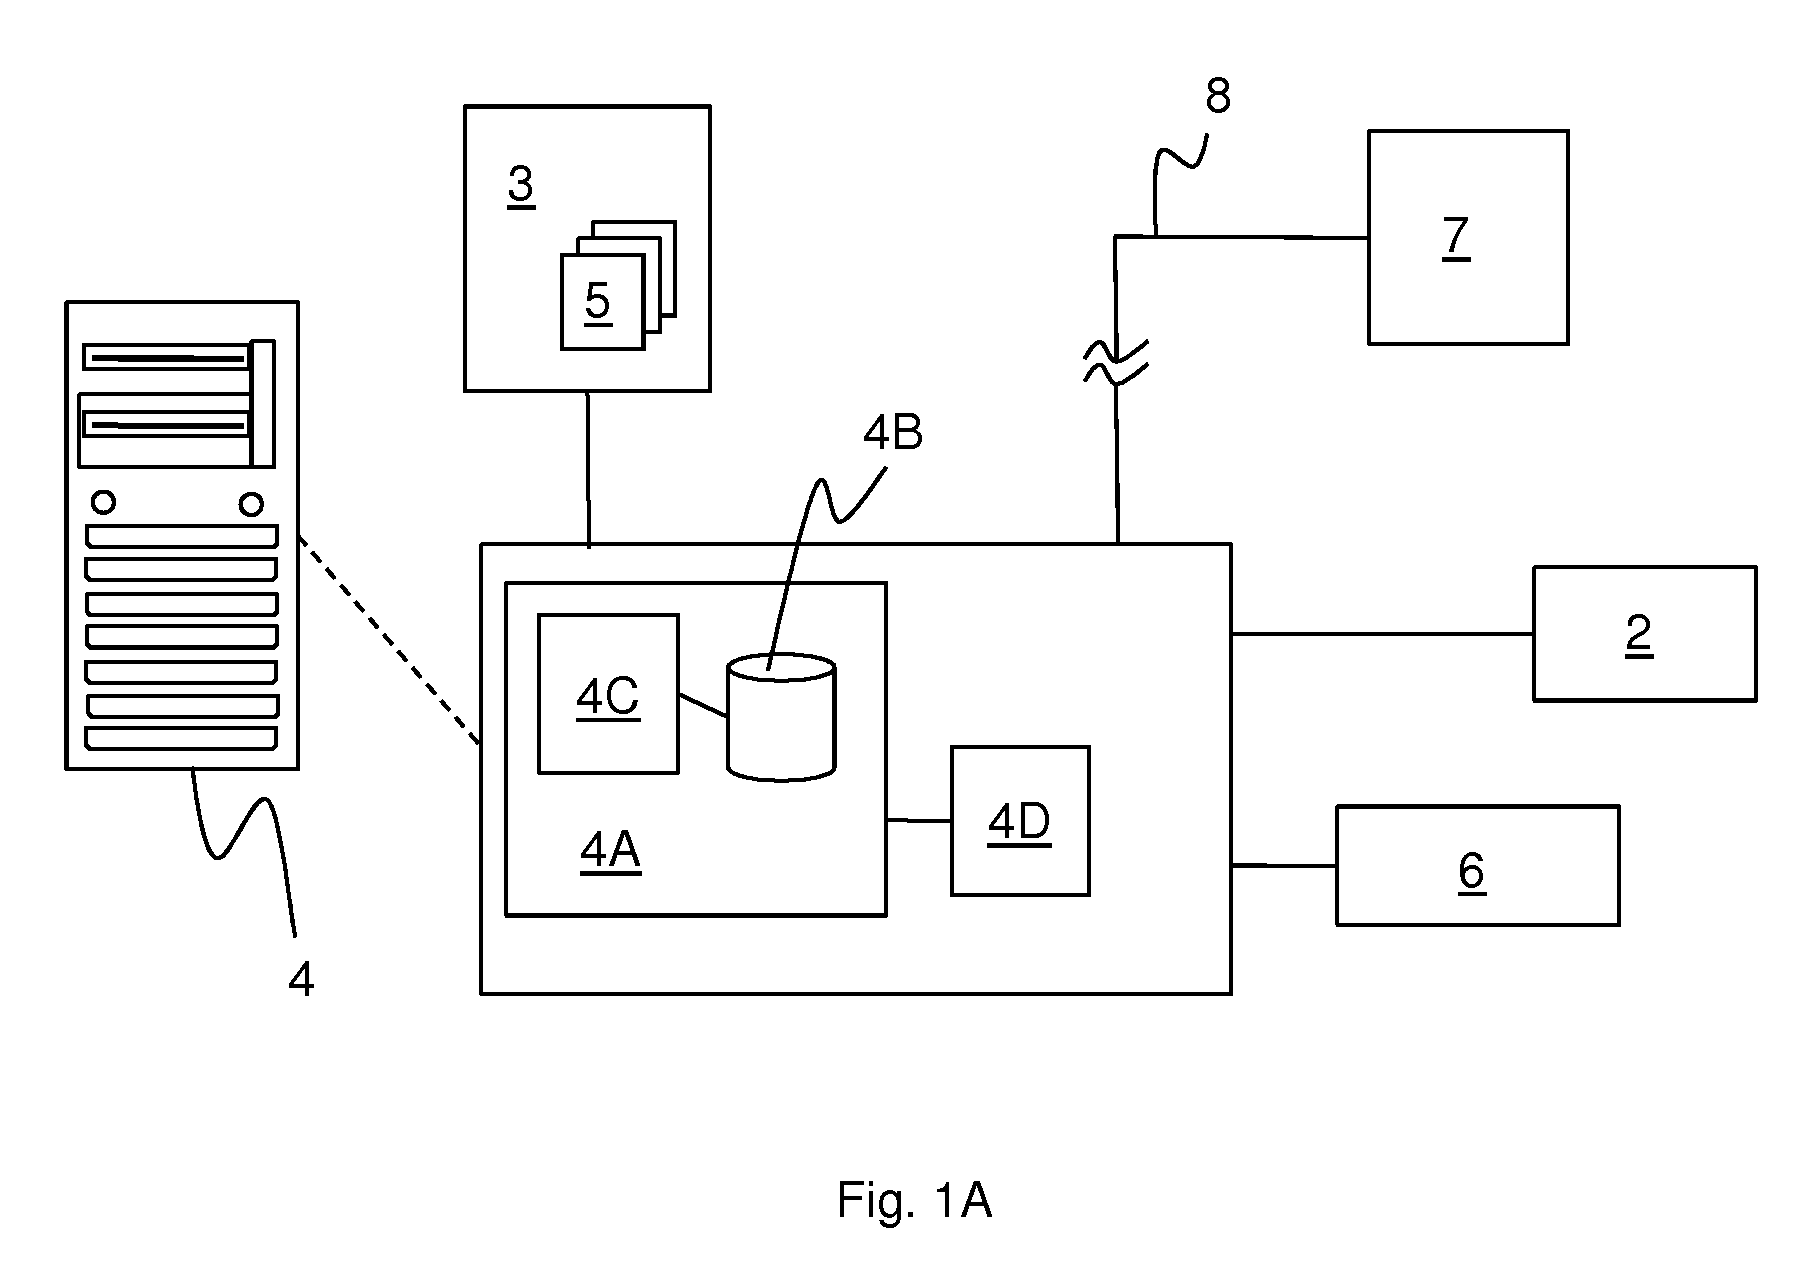 Method and apparatus for fabricating a foam container with a computer controlled laser cutting device